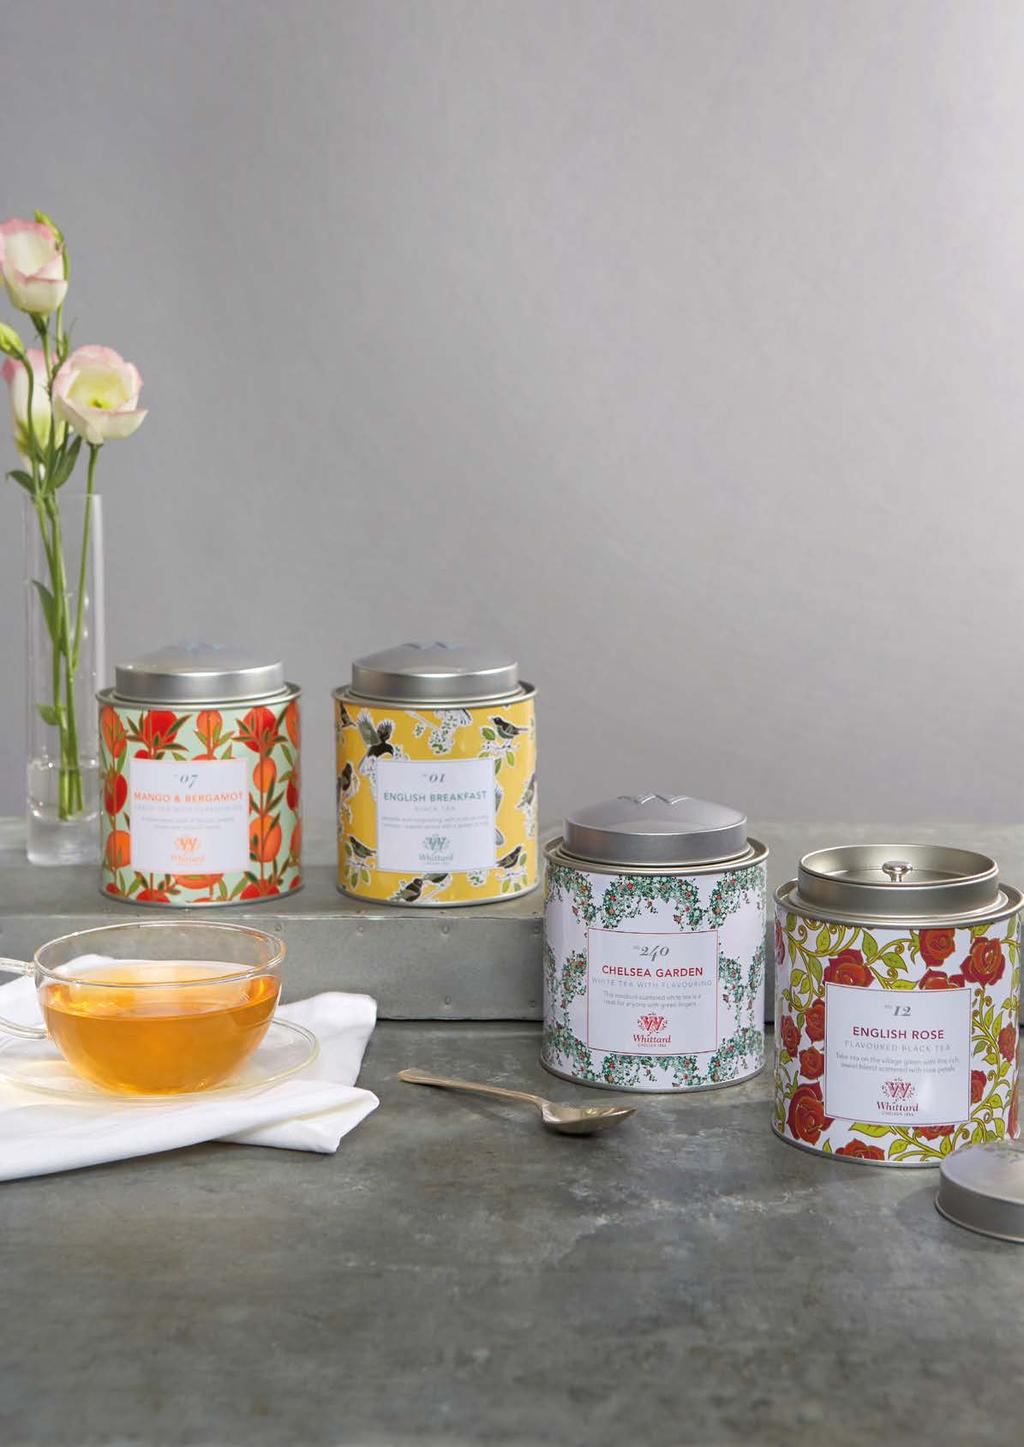 TEA DISCOVERIES Our Tea Discoveries collection showcases our most treasured blends, presented as a series of exquisite gifts and complemented by tea-infused